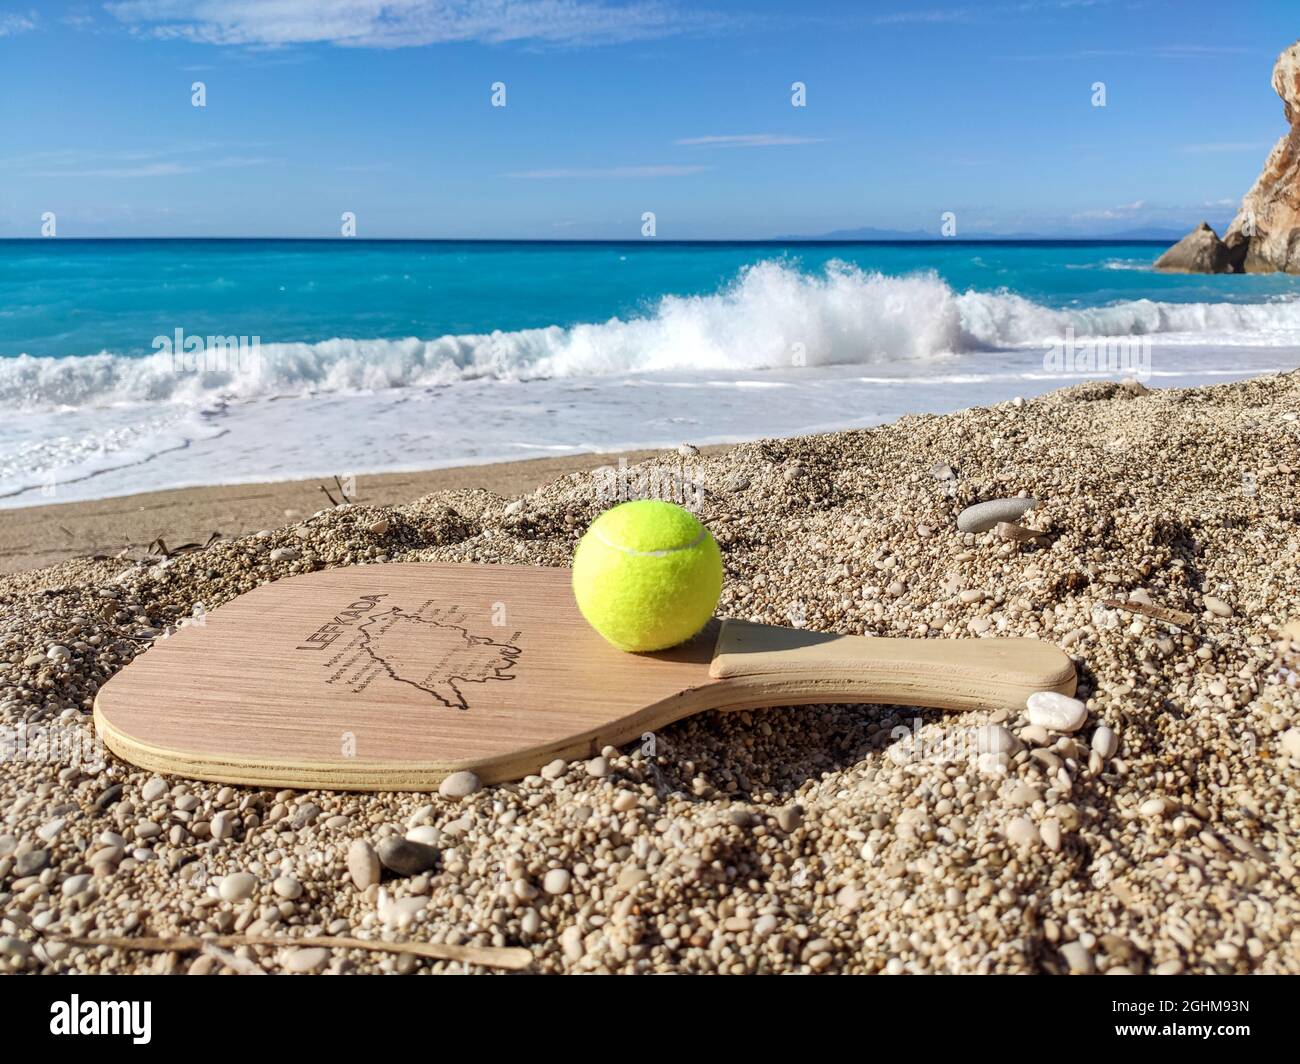 Matkot greek paddle beach tennis game with ball and wooden racket with map of Lefkada island, Greece. Sports equipment on sand beach with turquoise wa Stock Photo